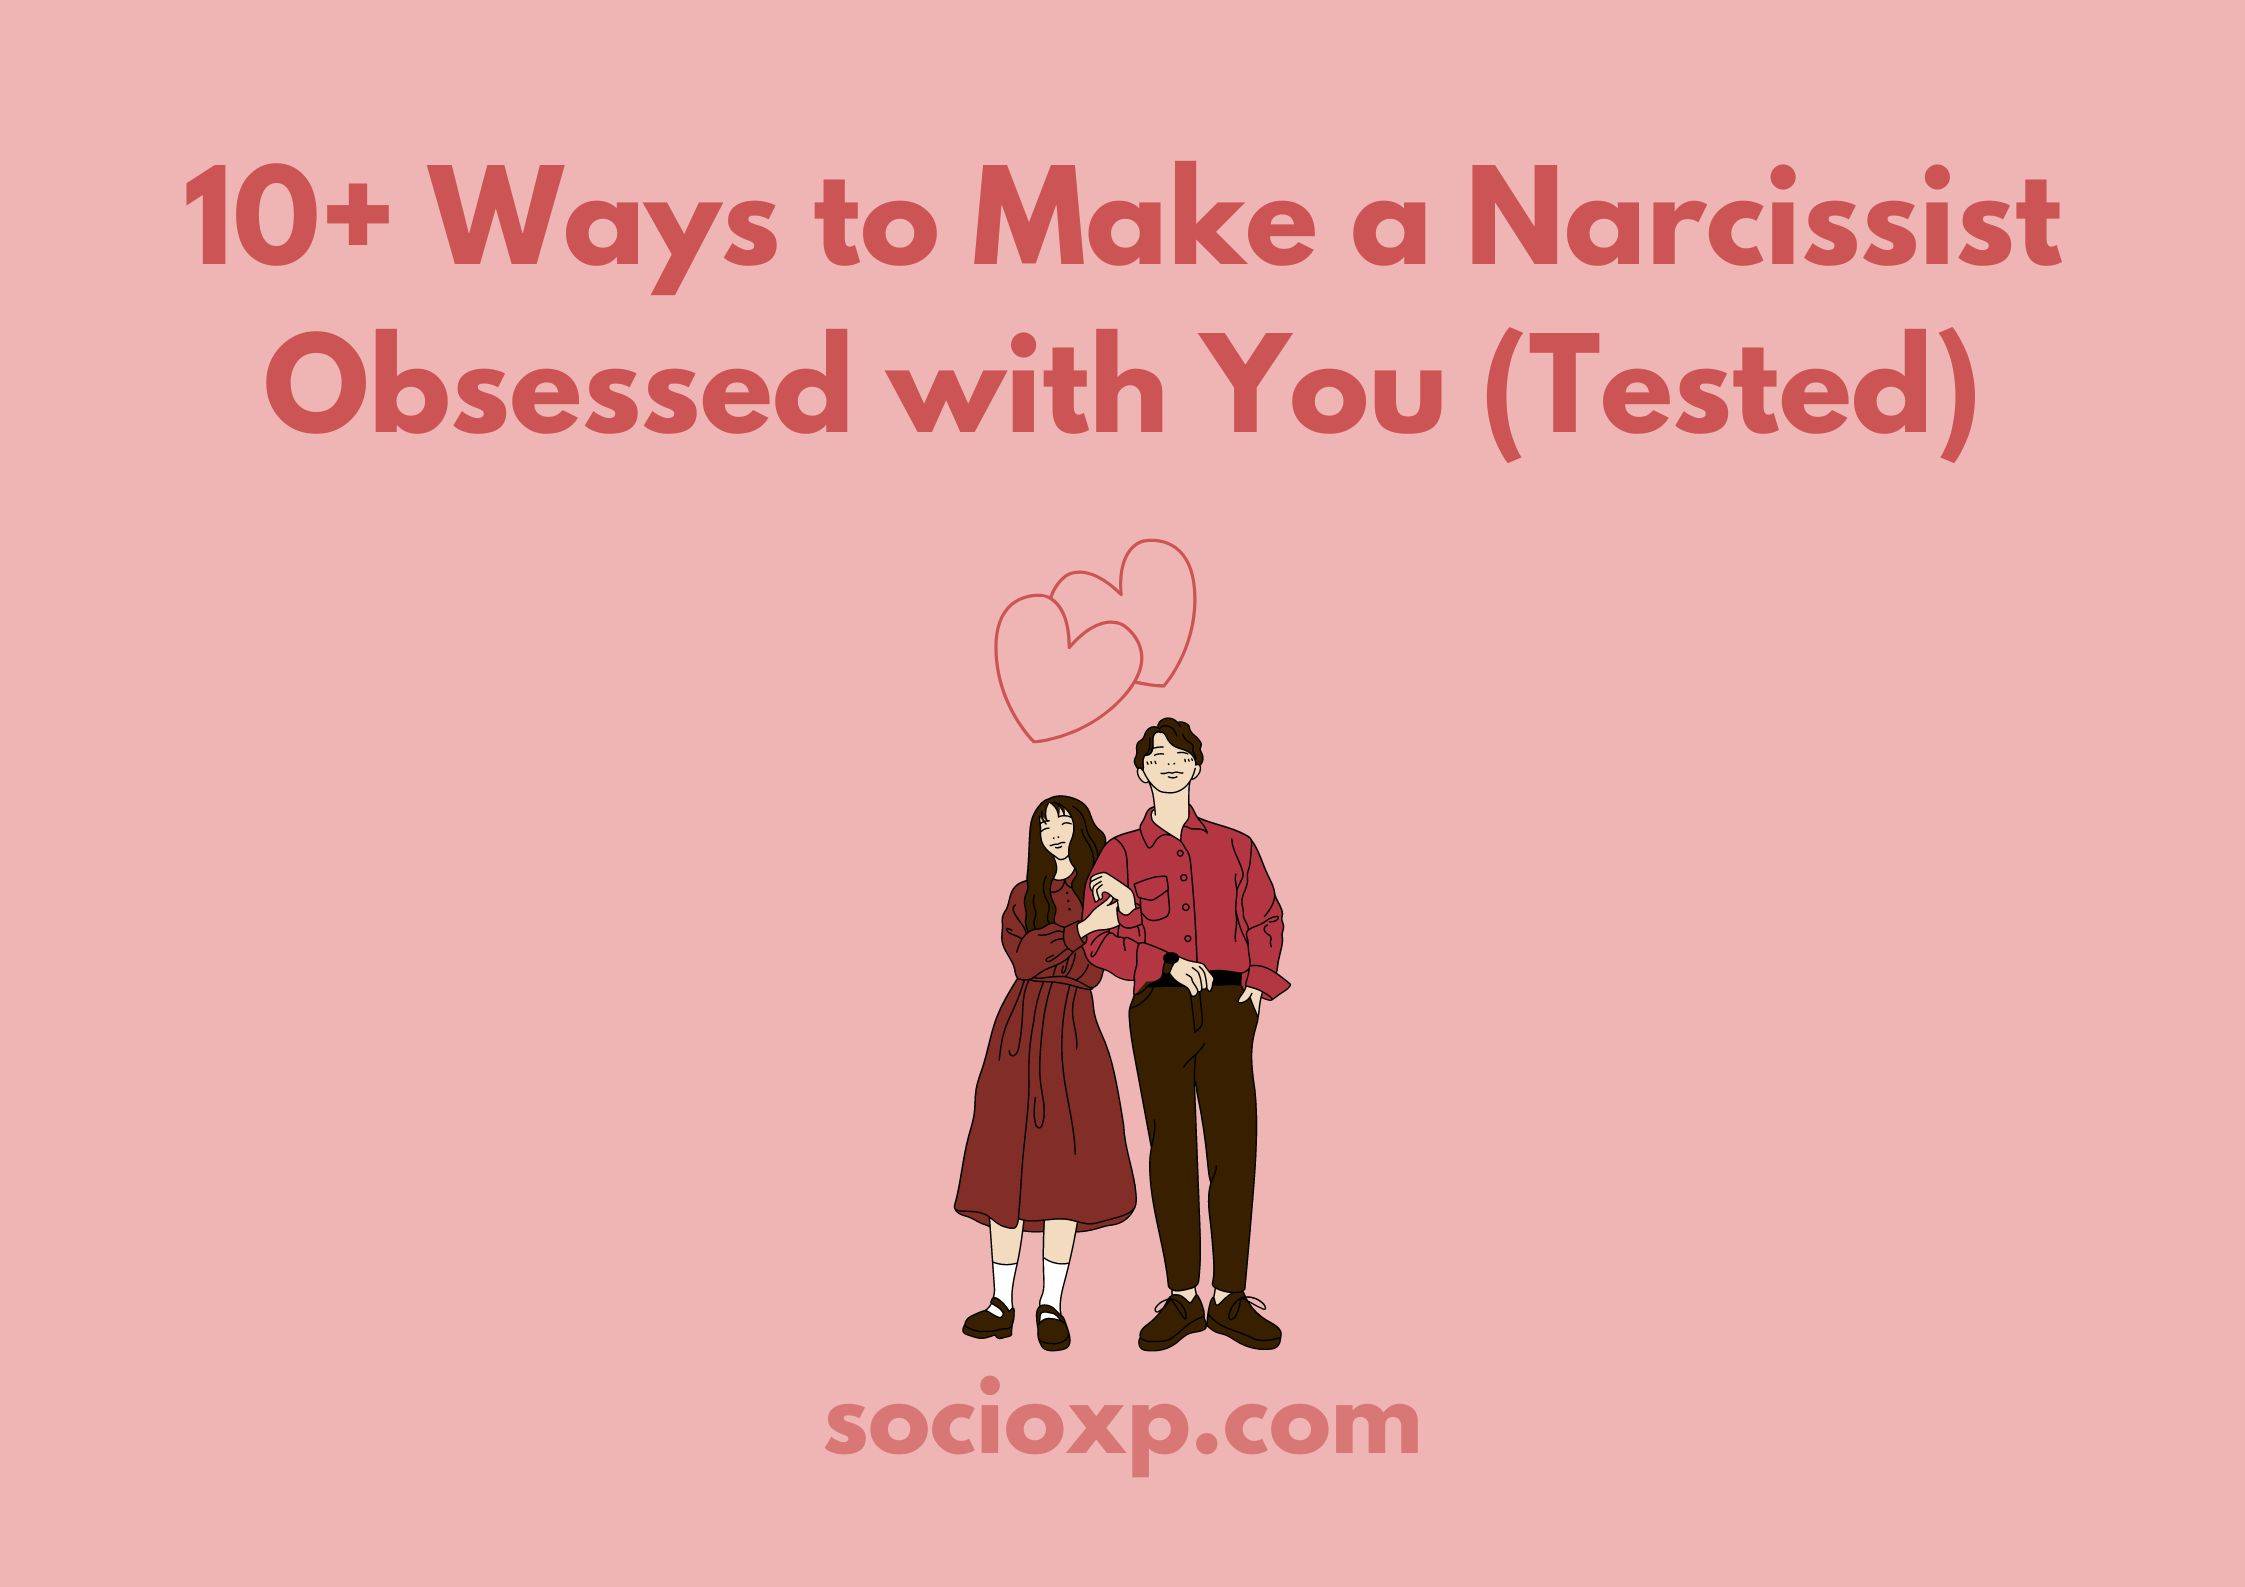 10+ Ways to Make a Narcissist Obsessed with You (Tested)